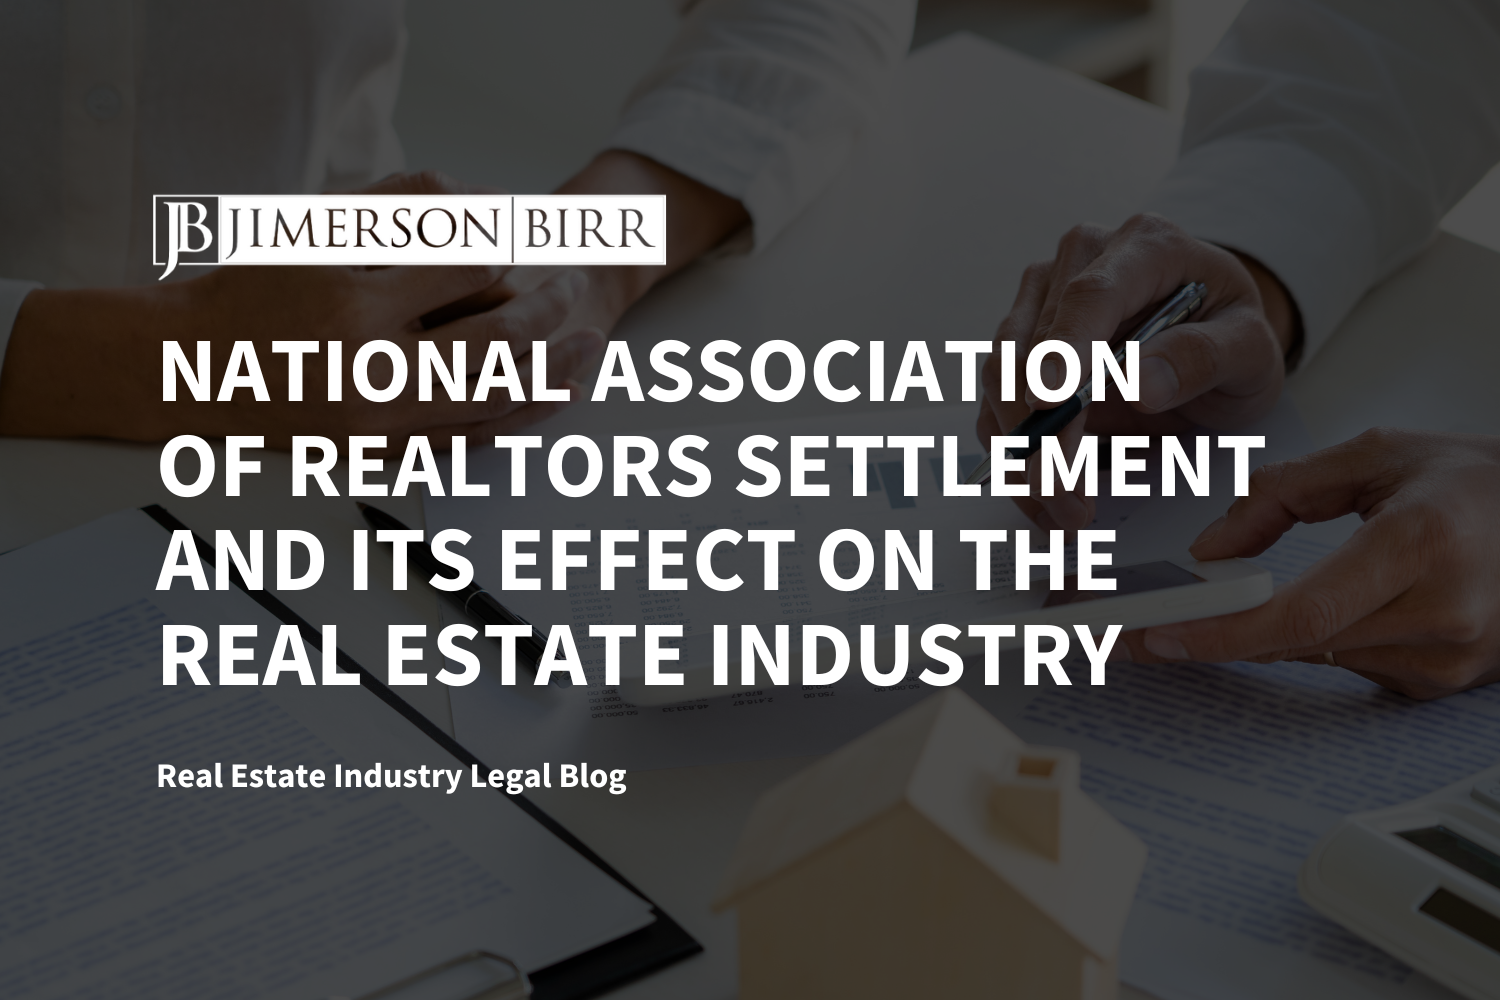 National Association of Realtors Settlement and its Effect on the Real Estate Industry